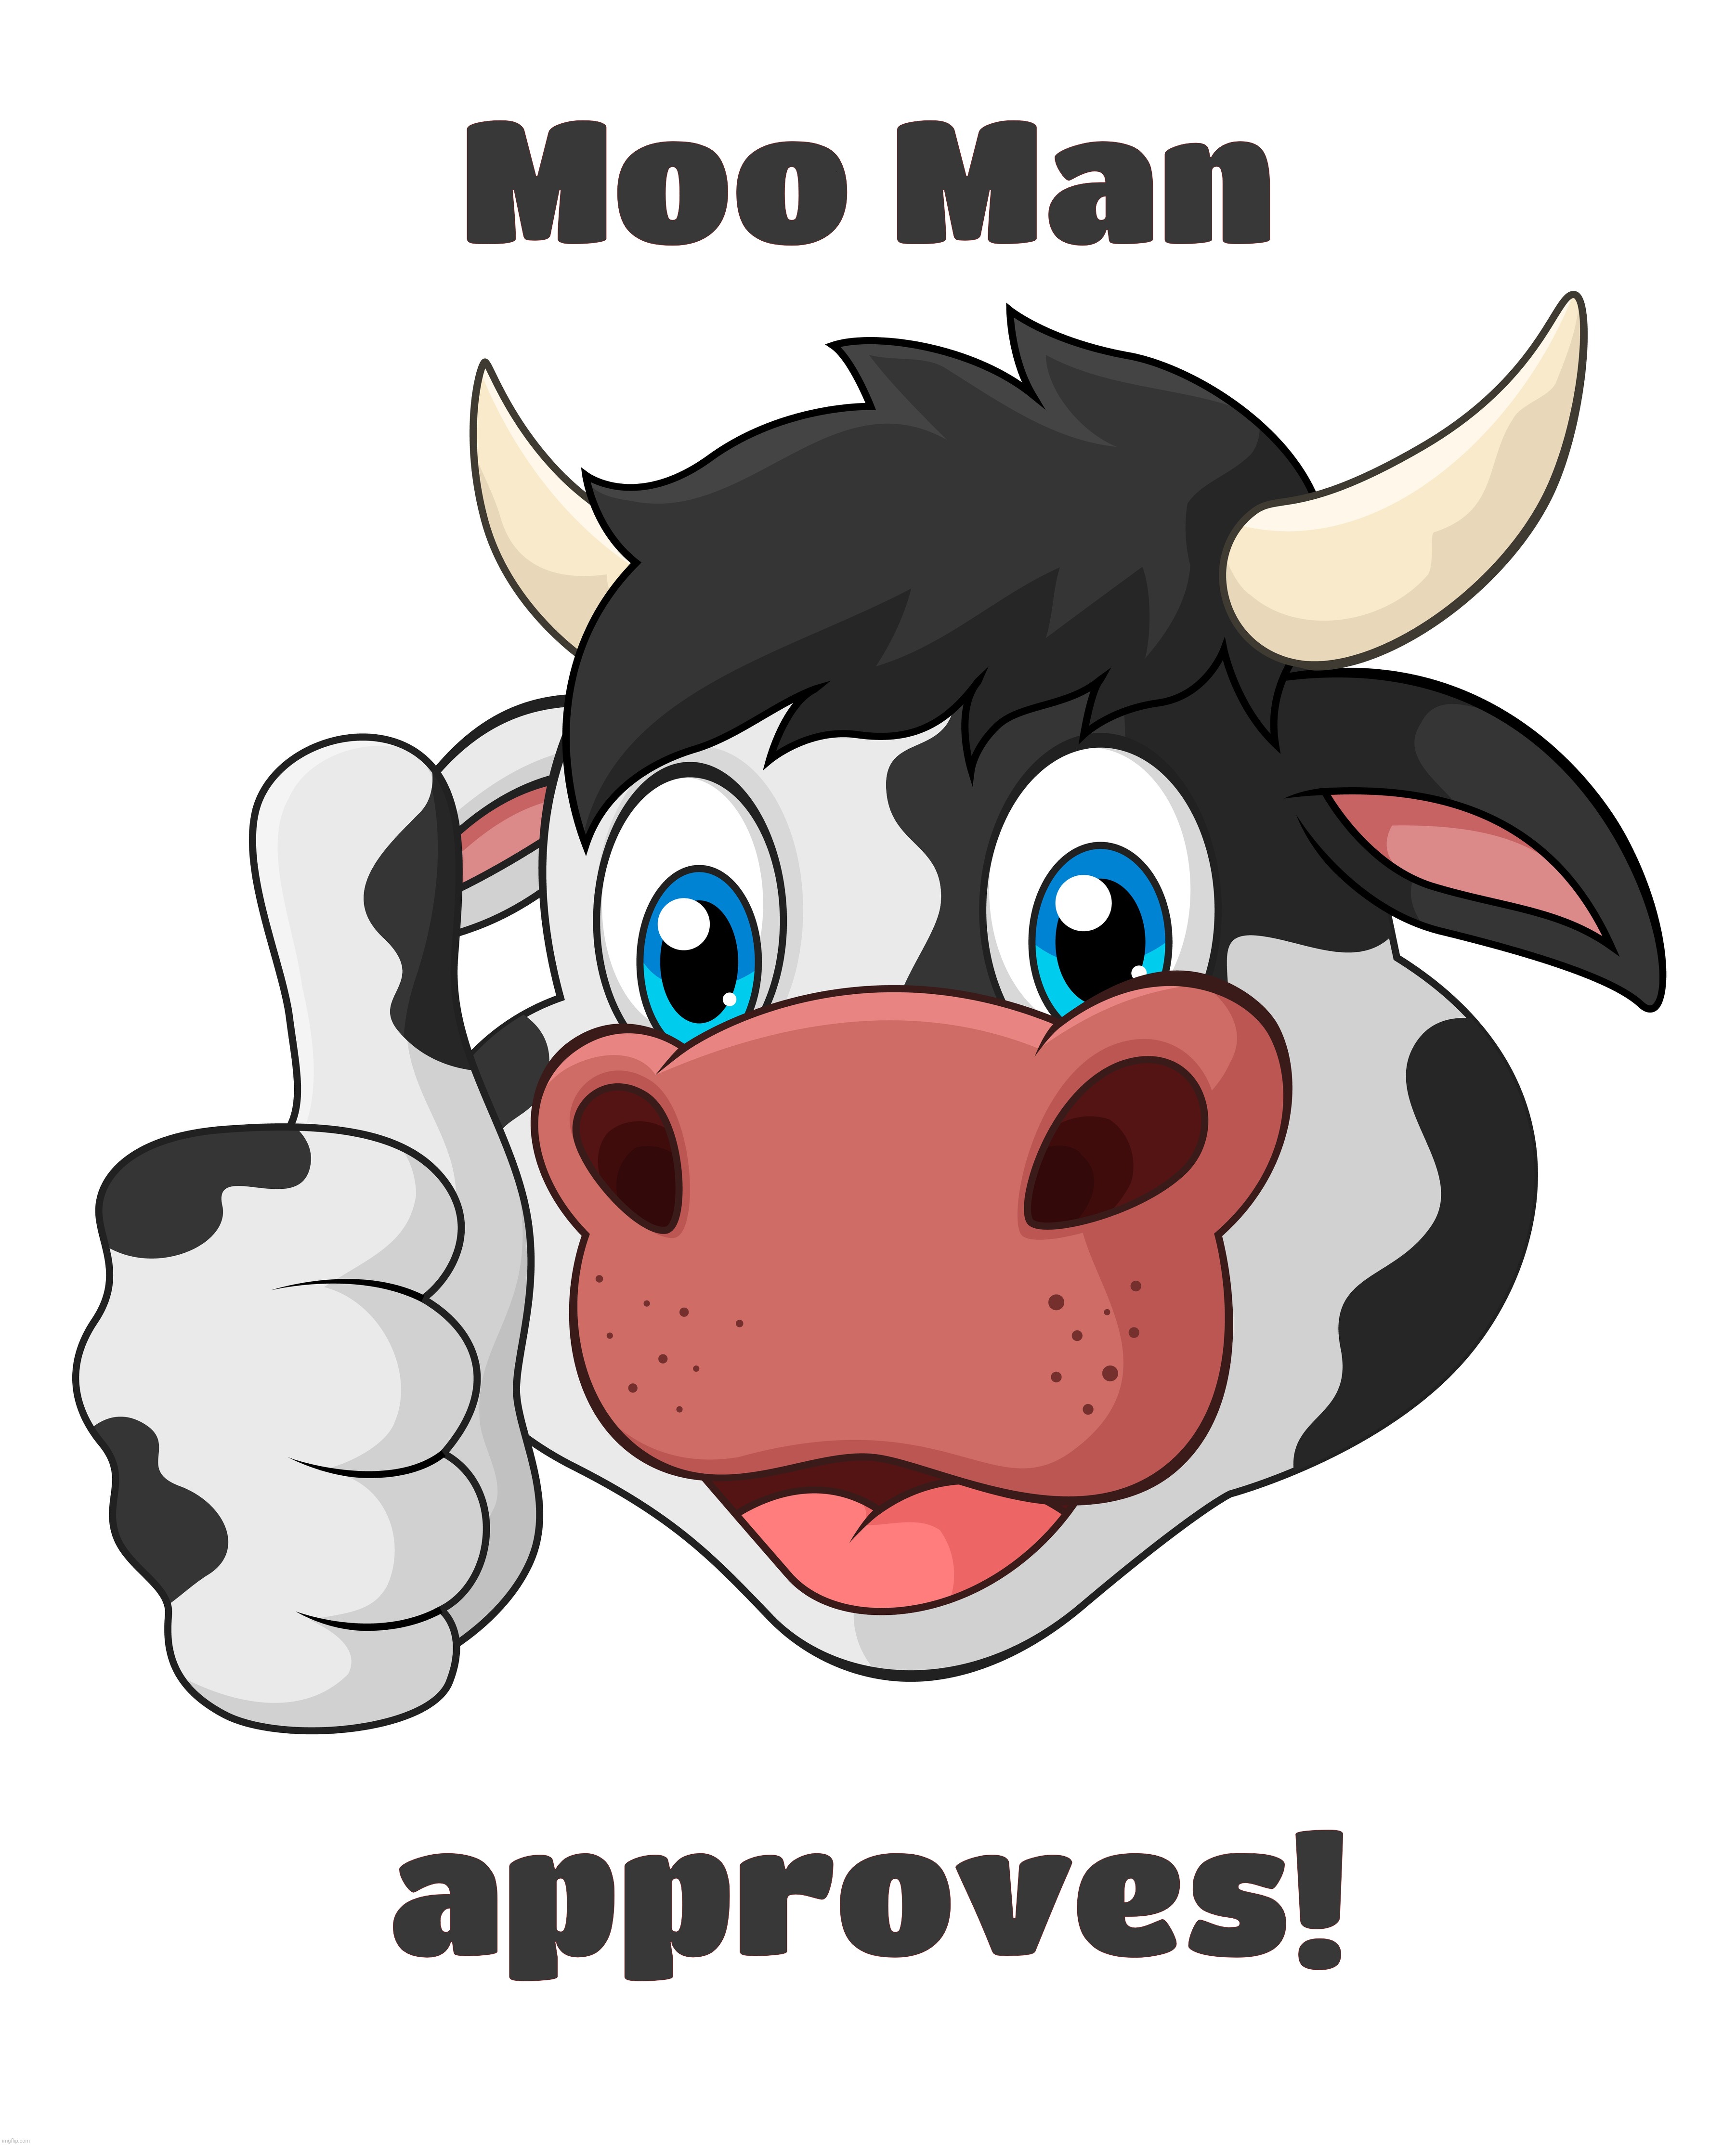 Moo Man likes it | Moo Man approves! | image tagged in cow thumbs up,moo man,moonie,it's all about thuh feelz,long live the singe,so emo | made w/ Imgflip meme maker